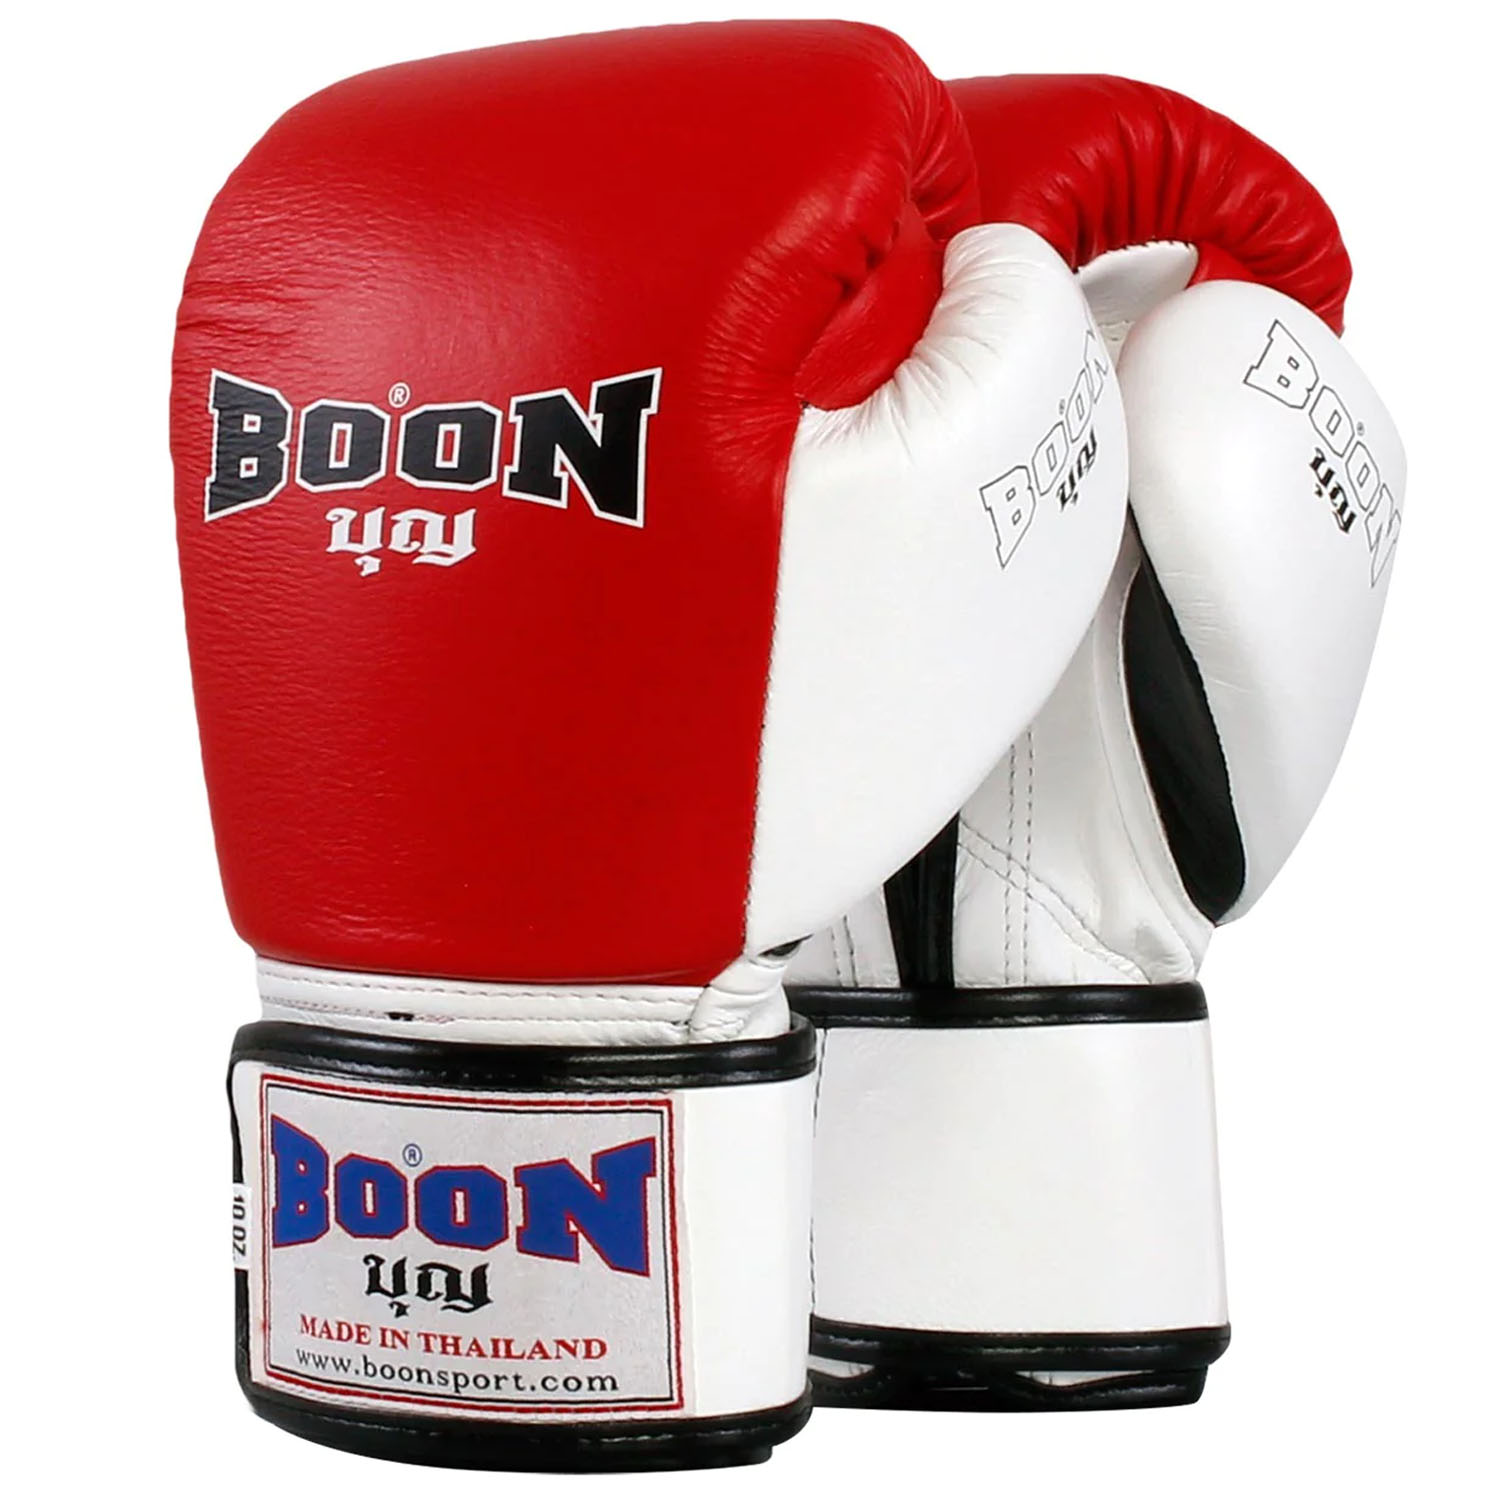 BOON Boxing Gloves, BGCBK, Compact Velcro, red-white